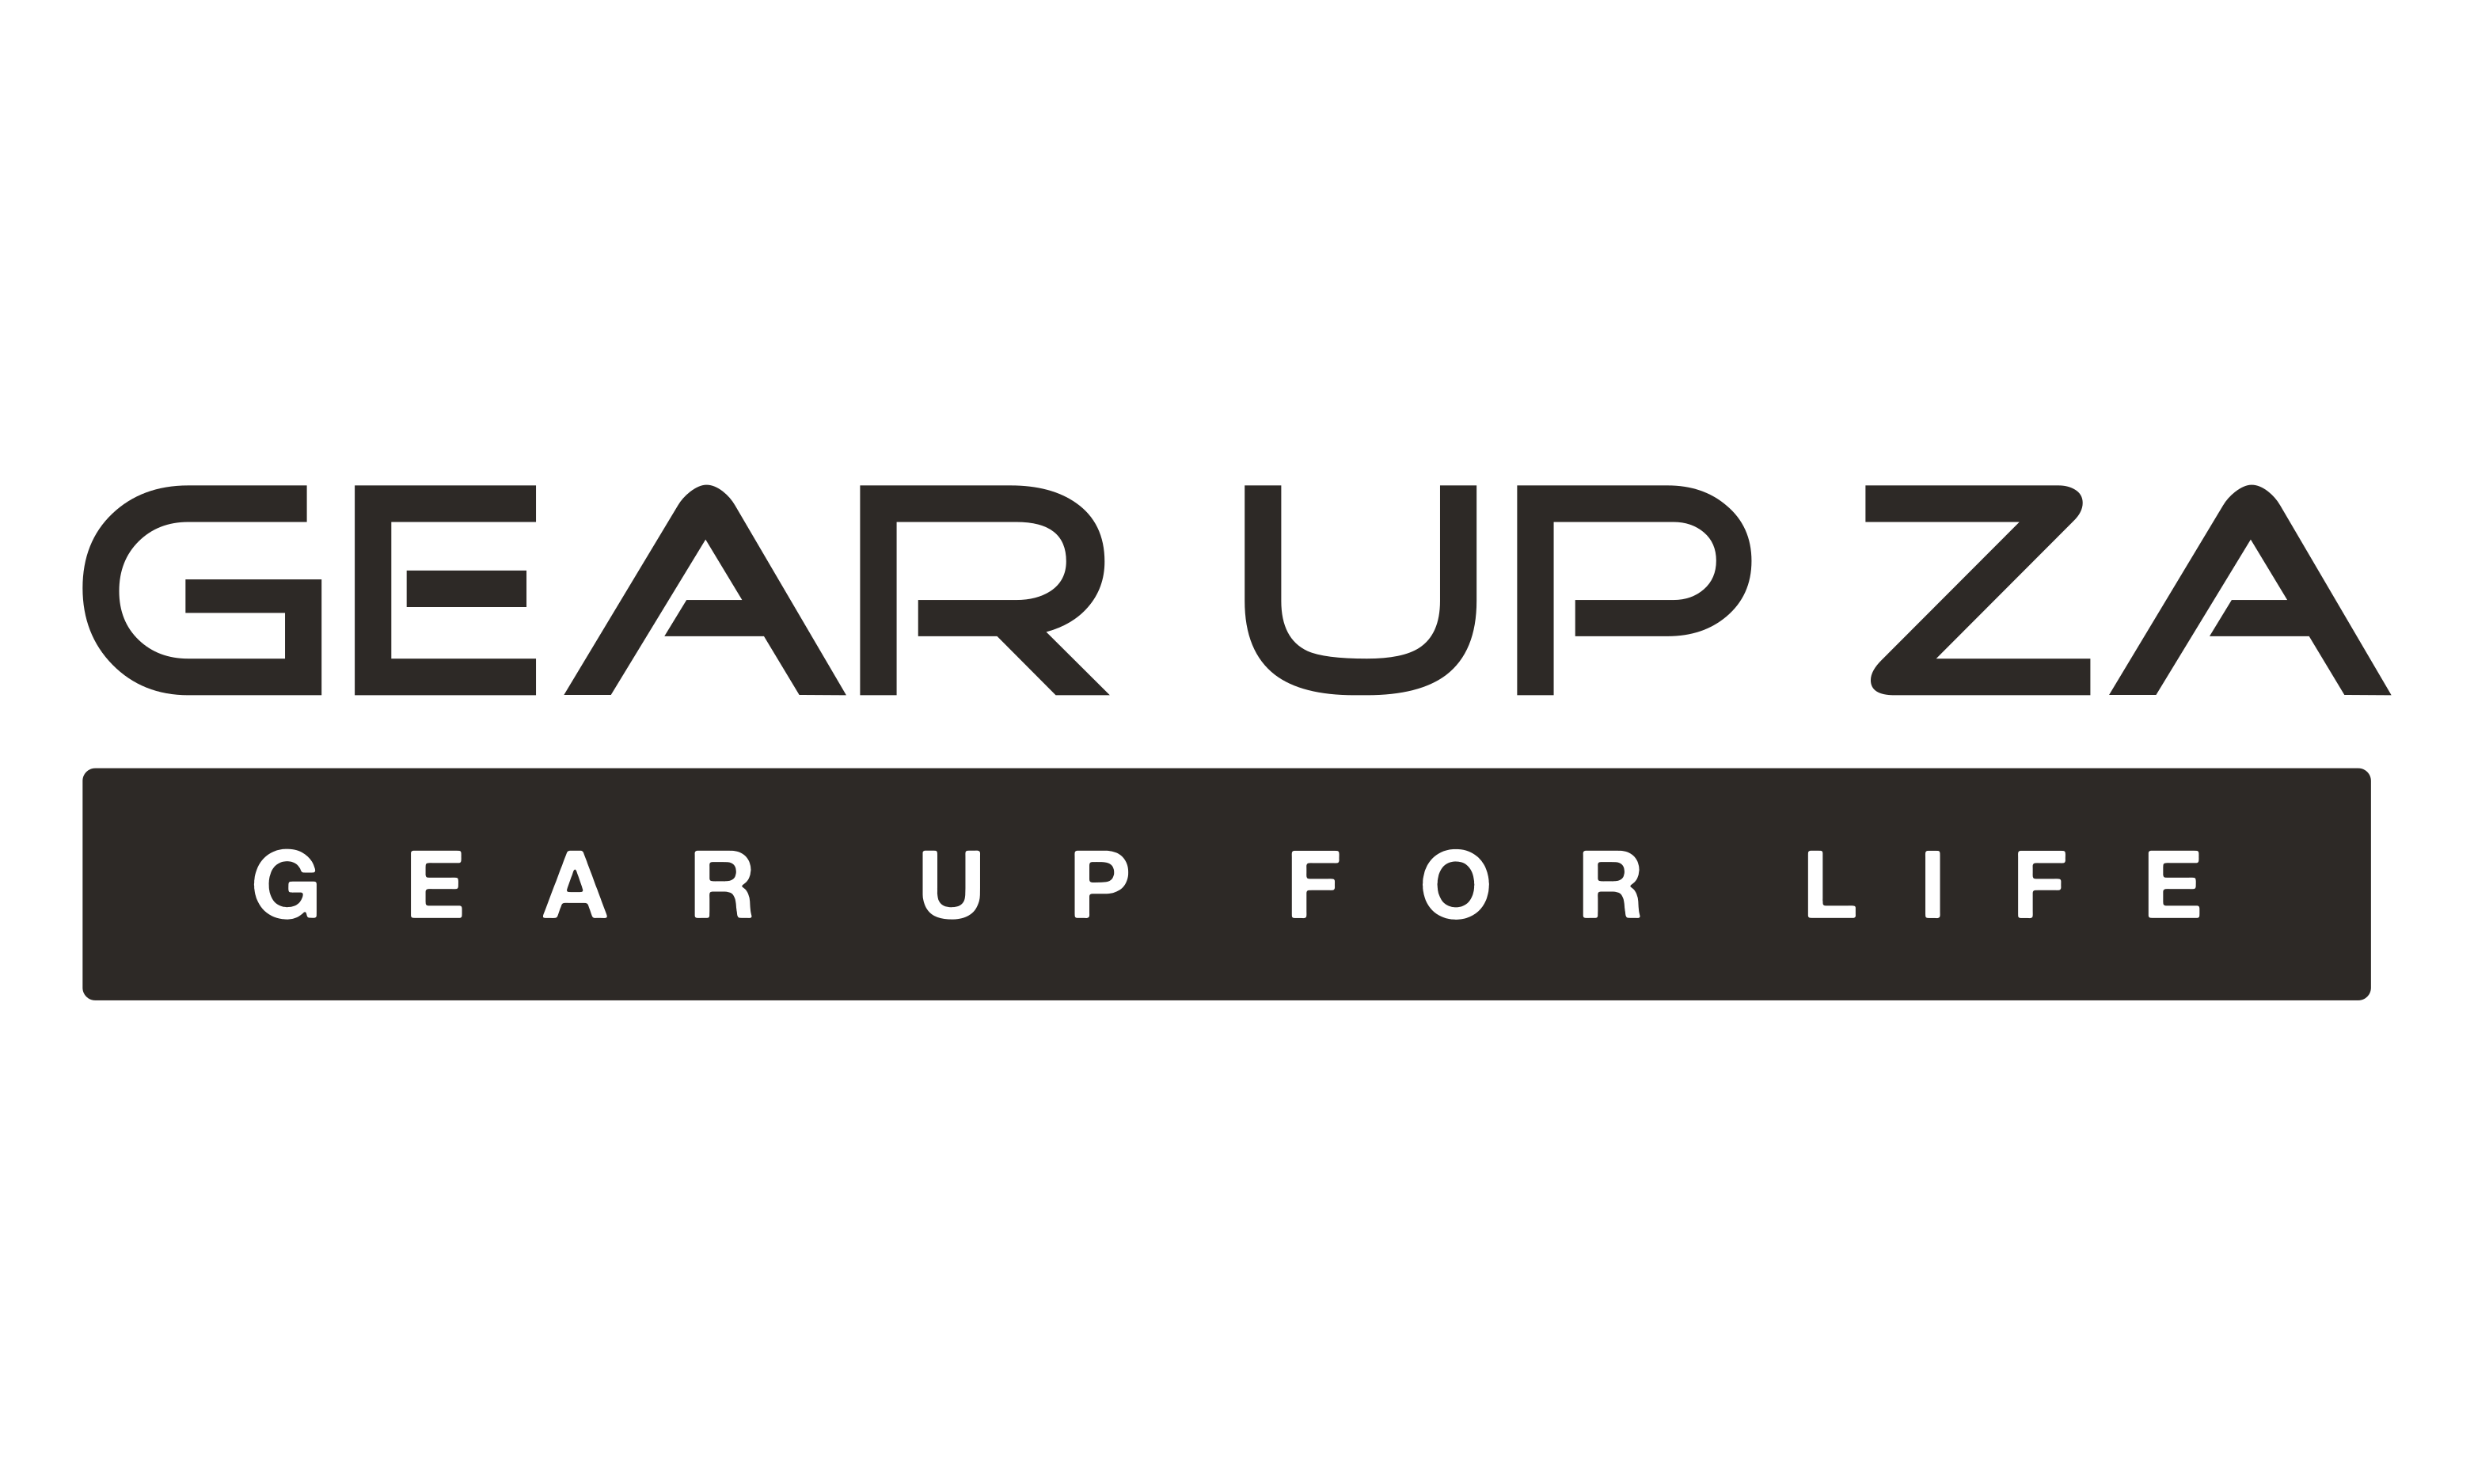 Gear Up ZA - Gear Up For Life!